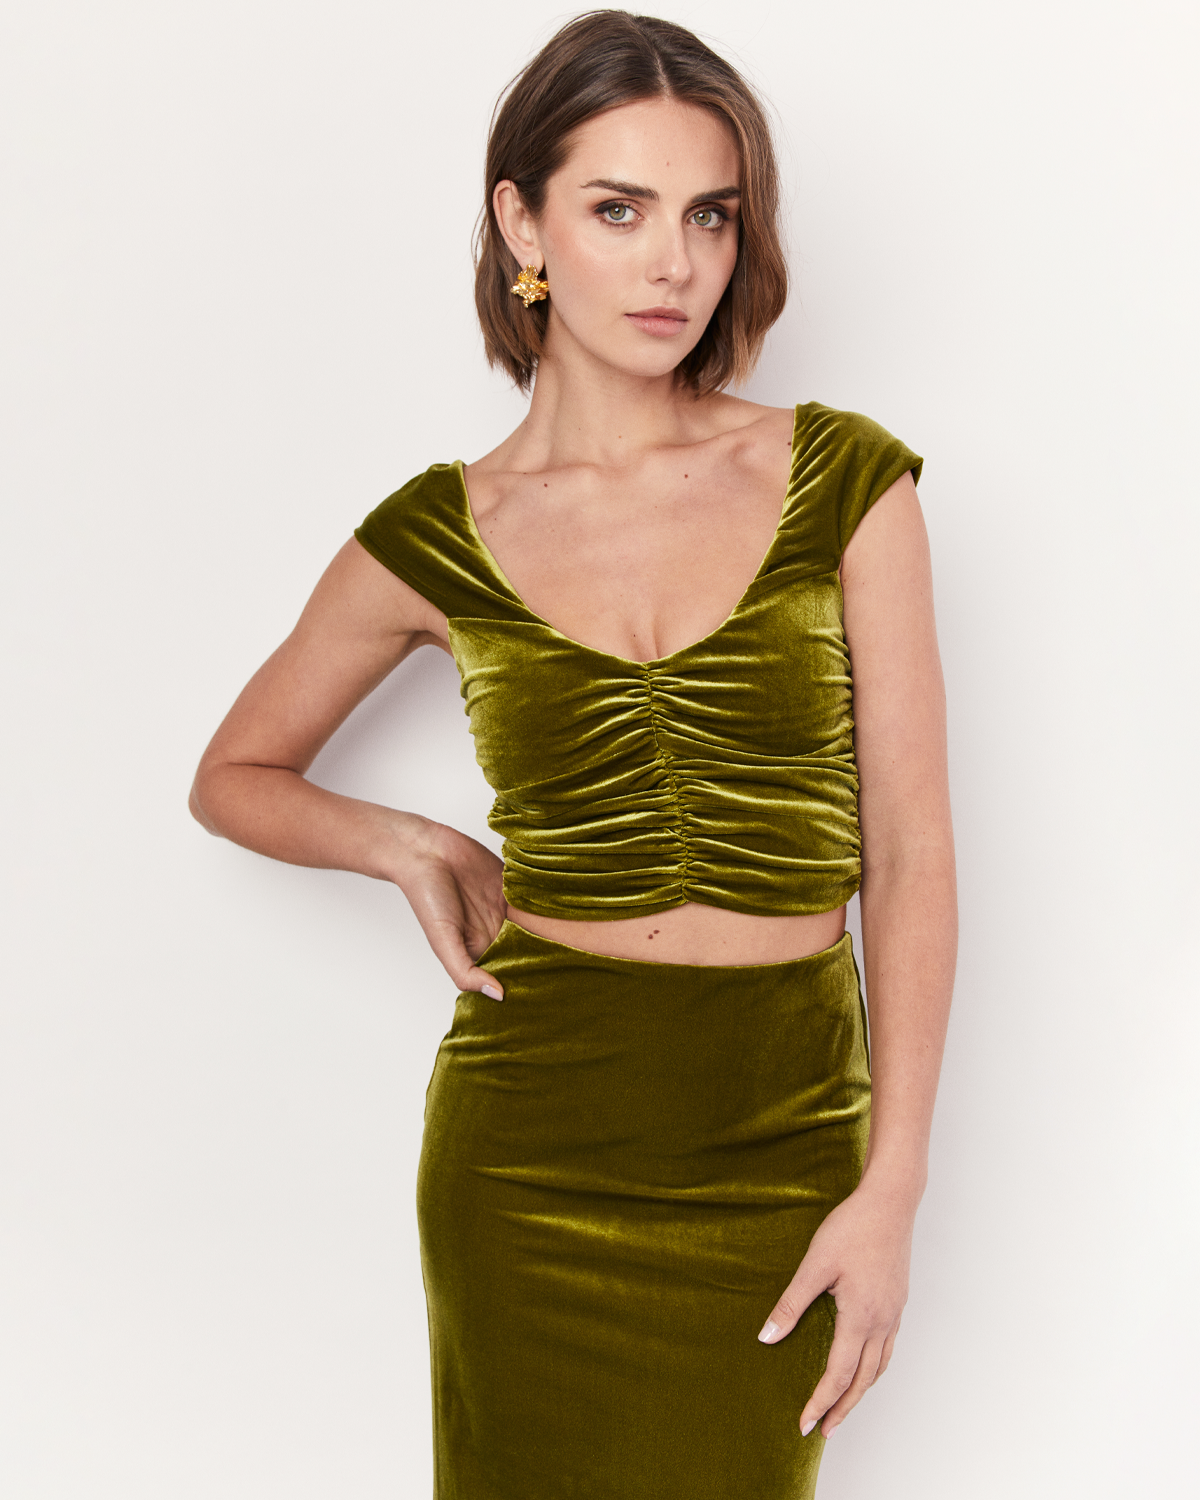 The Velvet Top exudes elegance and lust featuring ruched detailing, an off the shoulder neckline, and a cropped length. It is crafted from a plush stretch Velvet fabrication in a stunning green hue. Now available at Romy. 